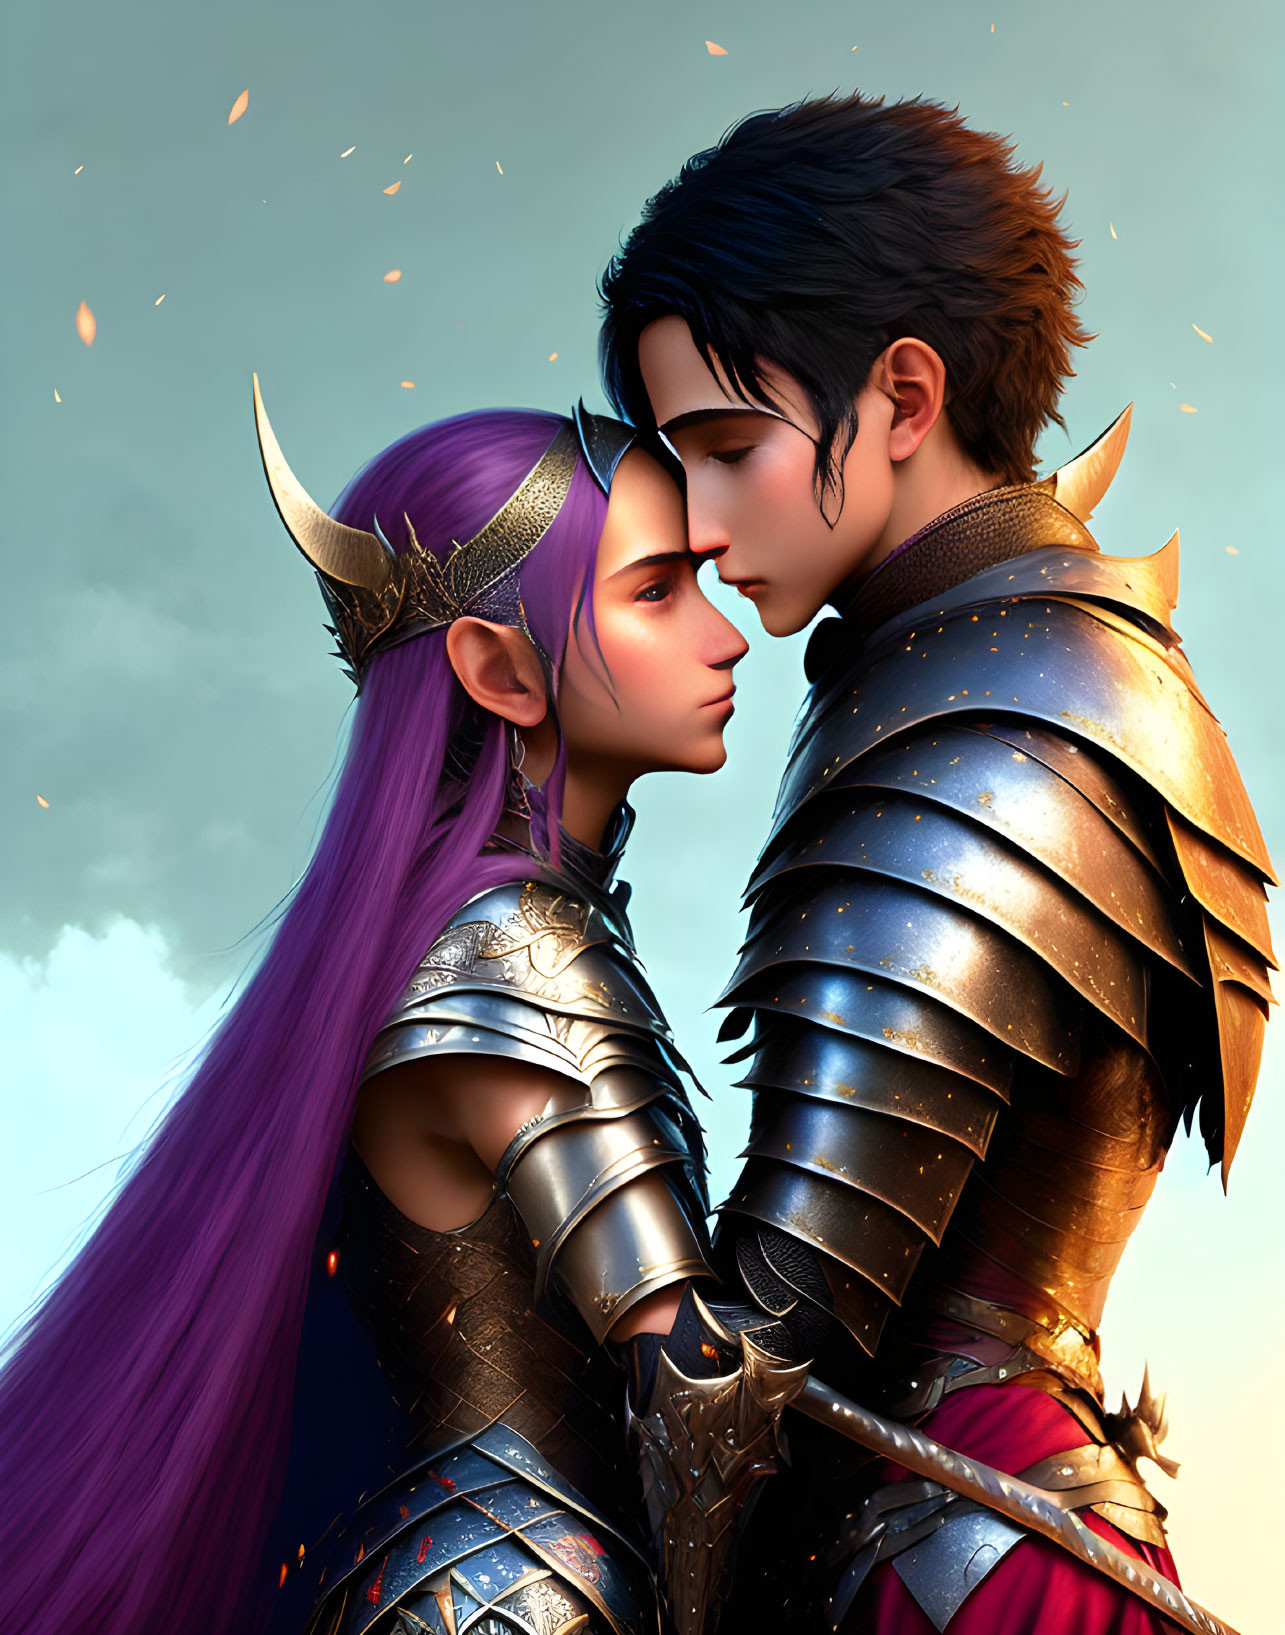 Medieval armor-clad animated characters embrace under ember-filled sky